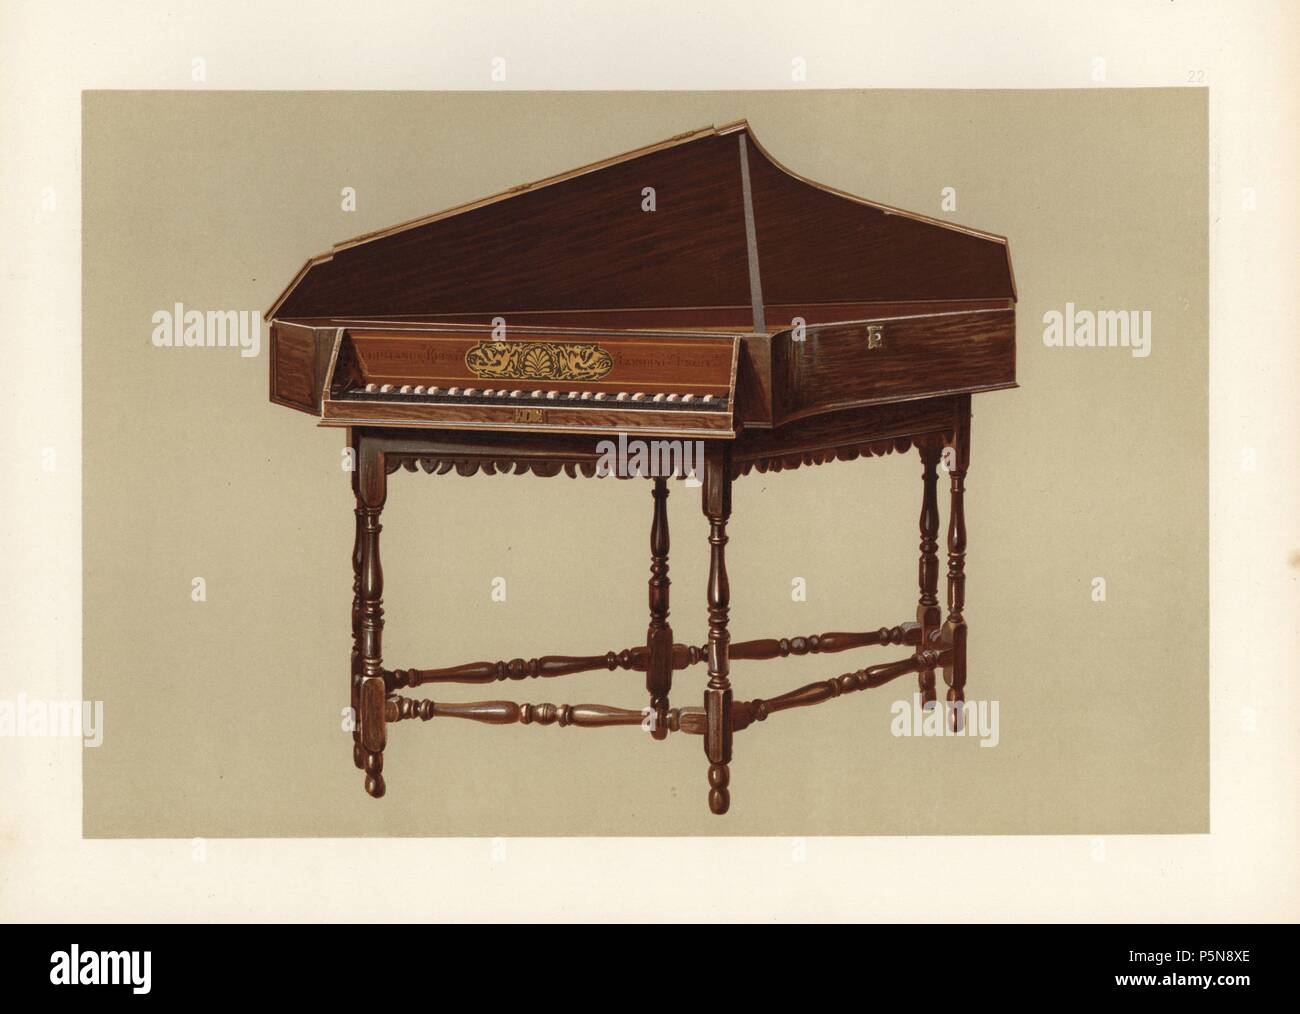 A transverse spinet with six legs made in London by Stephen Keene at the end of the 17th century. Keene was a well-known maker of 'harpsycons and virginals' from at least 1671 to 1719. Chromolithograph from an illustration by William Gibb from A.J. Hipkins' 'Musical Instruments, Historic, Rare and Unique,' Adam and Charles Black, Edinburgh, 1888. Alfred James Hipkins (1826-1903) was an English musicologist who specialized in the history of the pianoforte and other instruments. William Gibb was a master illustrator and chromolithographer and illustrated 'The Royal House of Stuart' (1890), 'Nava Stock Photo